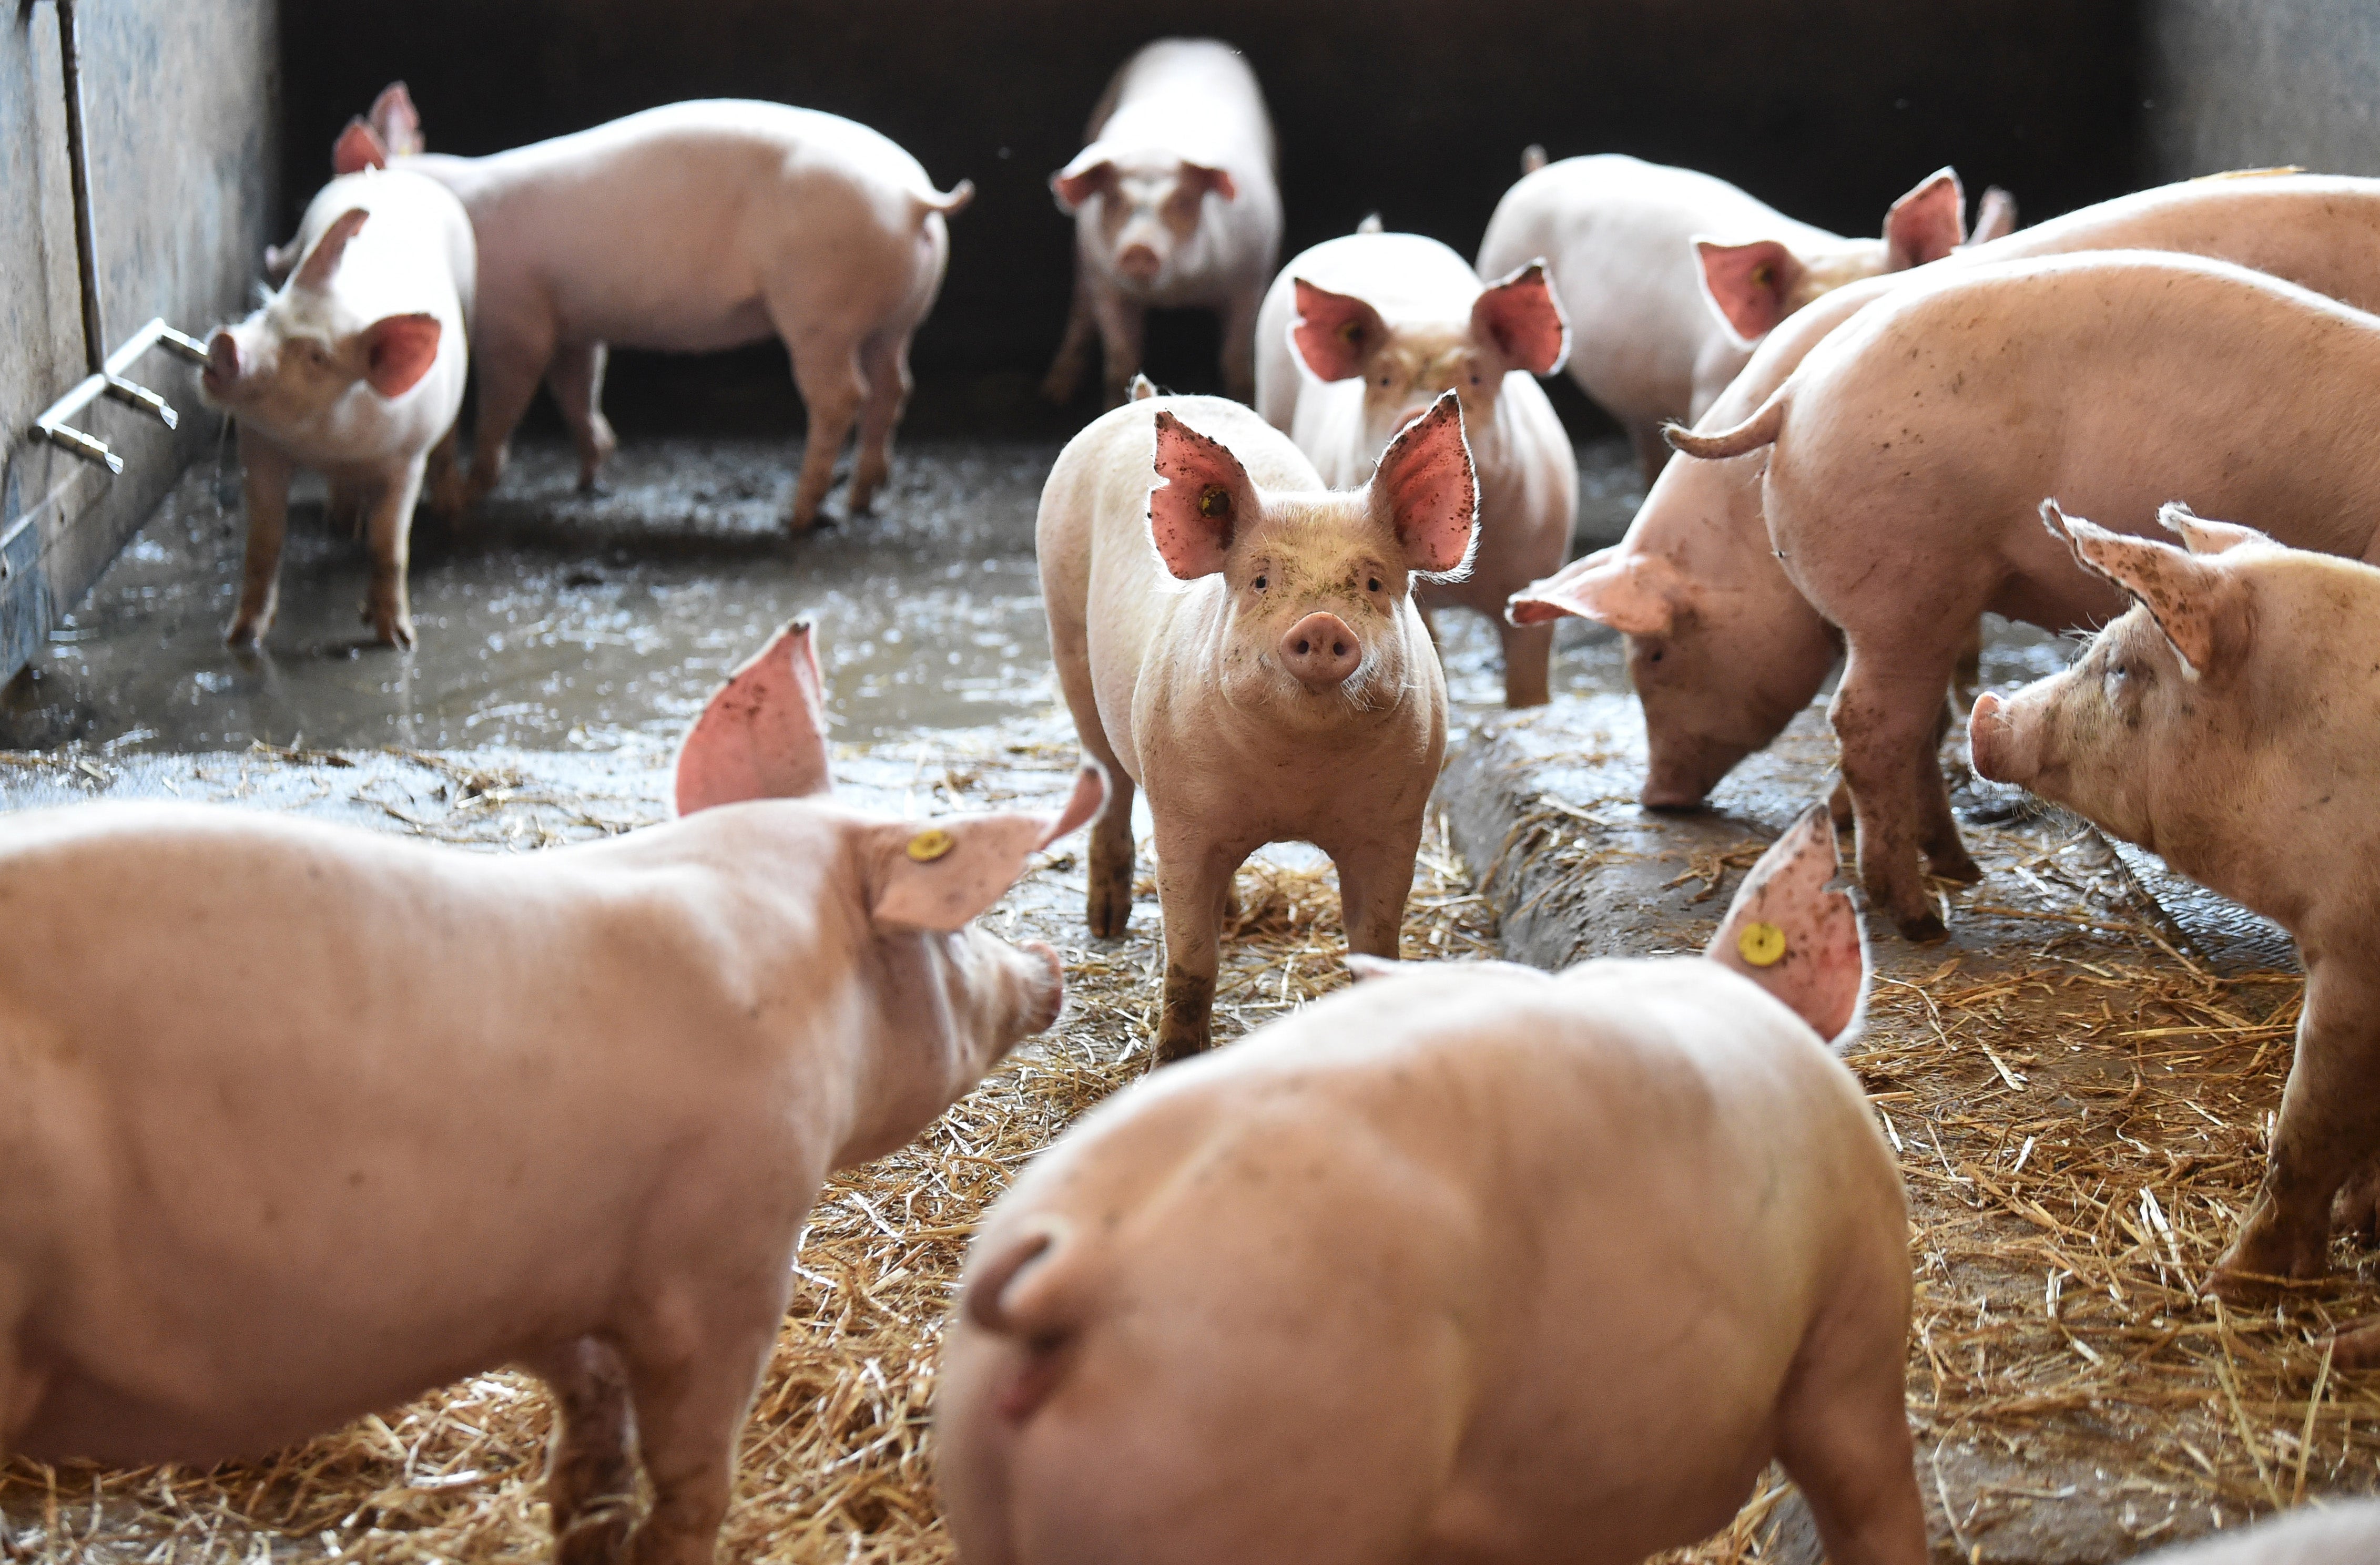 EU rules, introduced on Friday, ban the import of animal produce reared with antibiotic growth promoters.